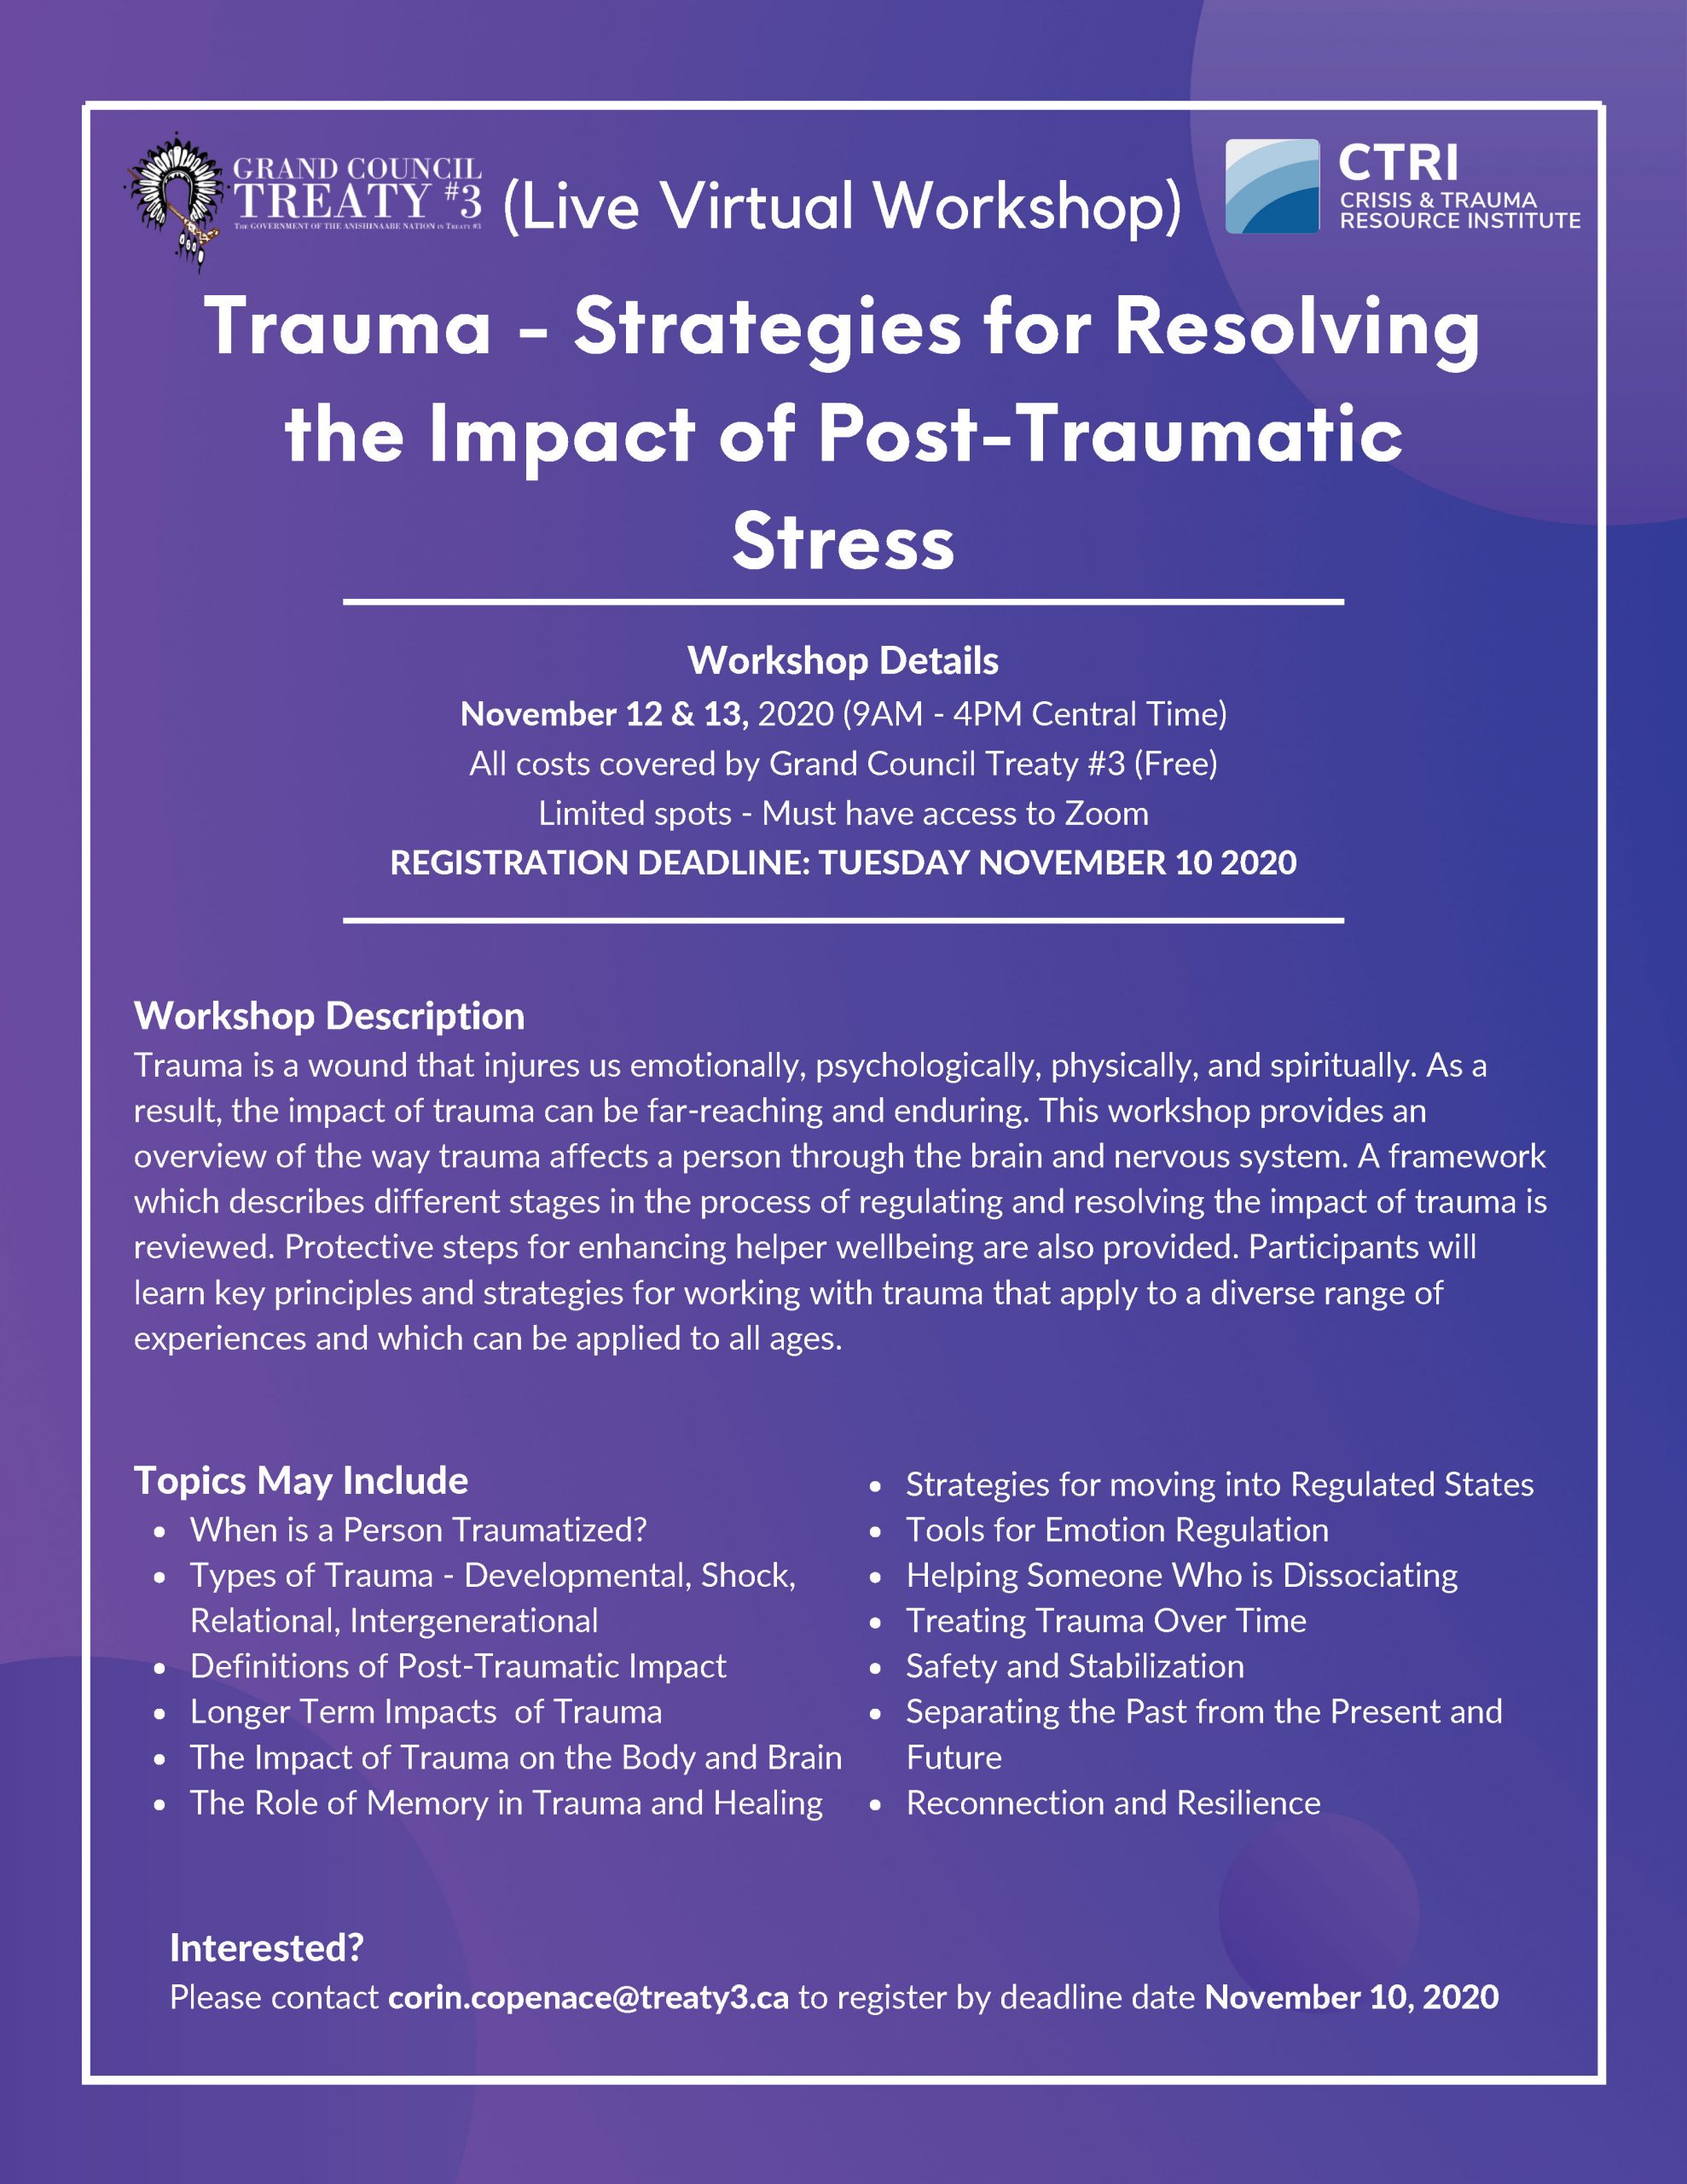 Trauma - Strategies for Resolving the Impact of Post-Traumatic Stress (Registration Closed)